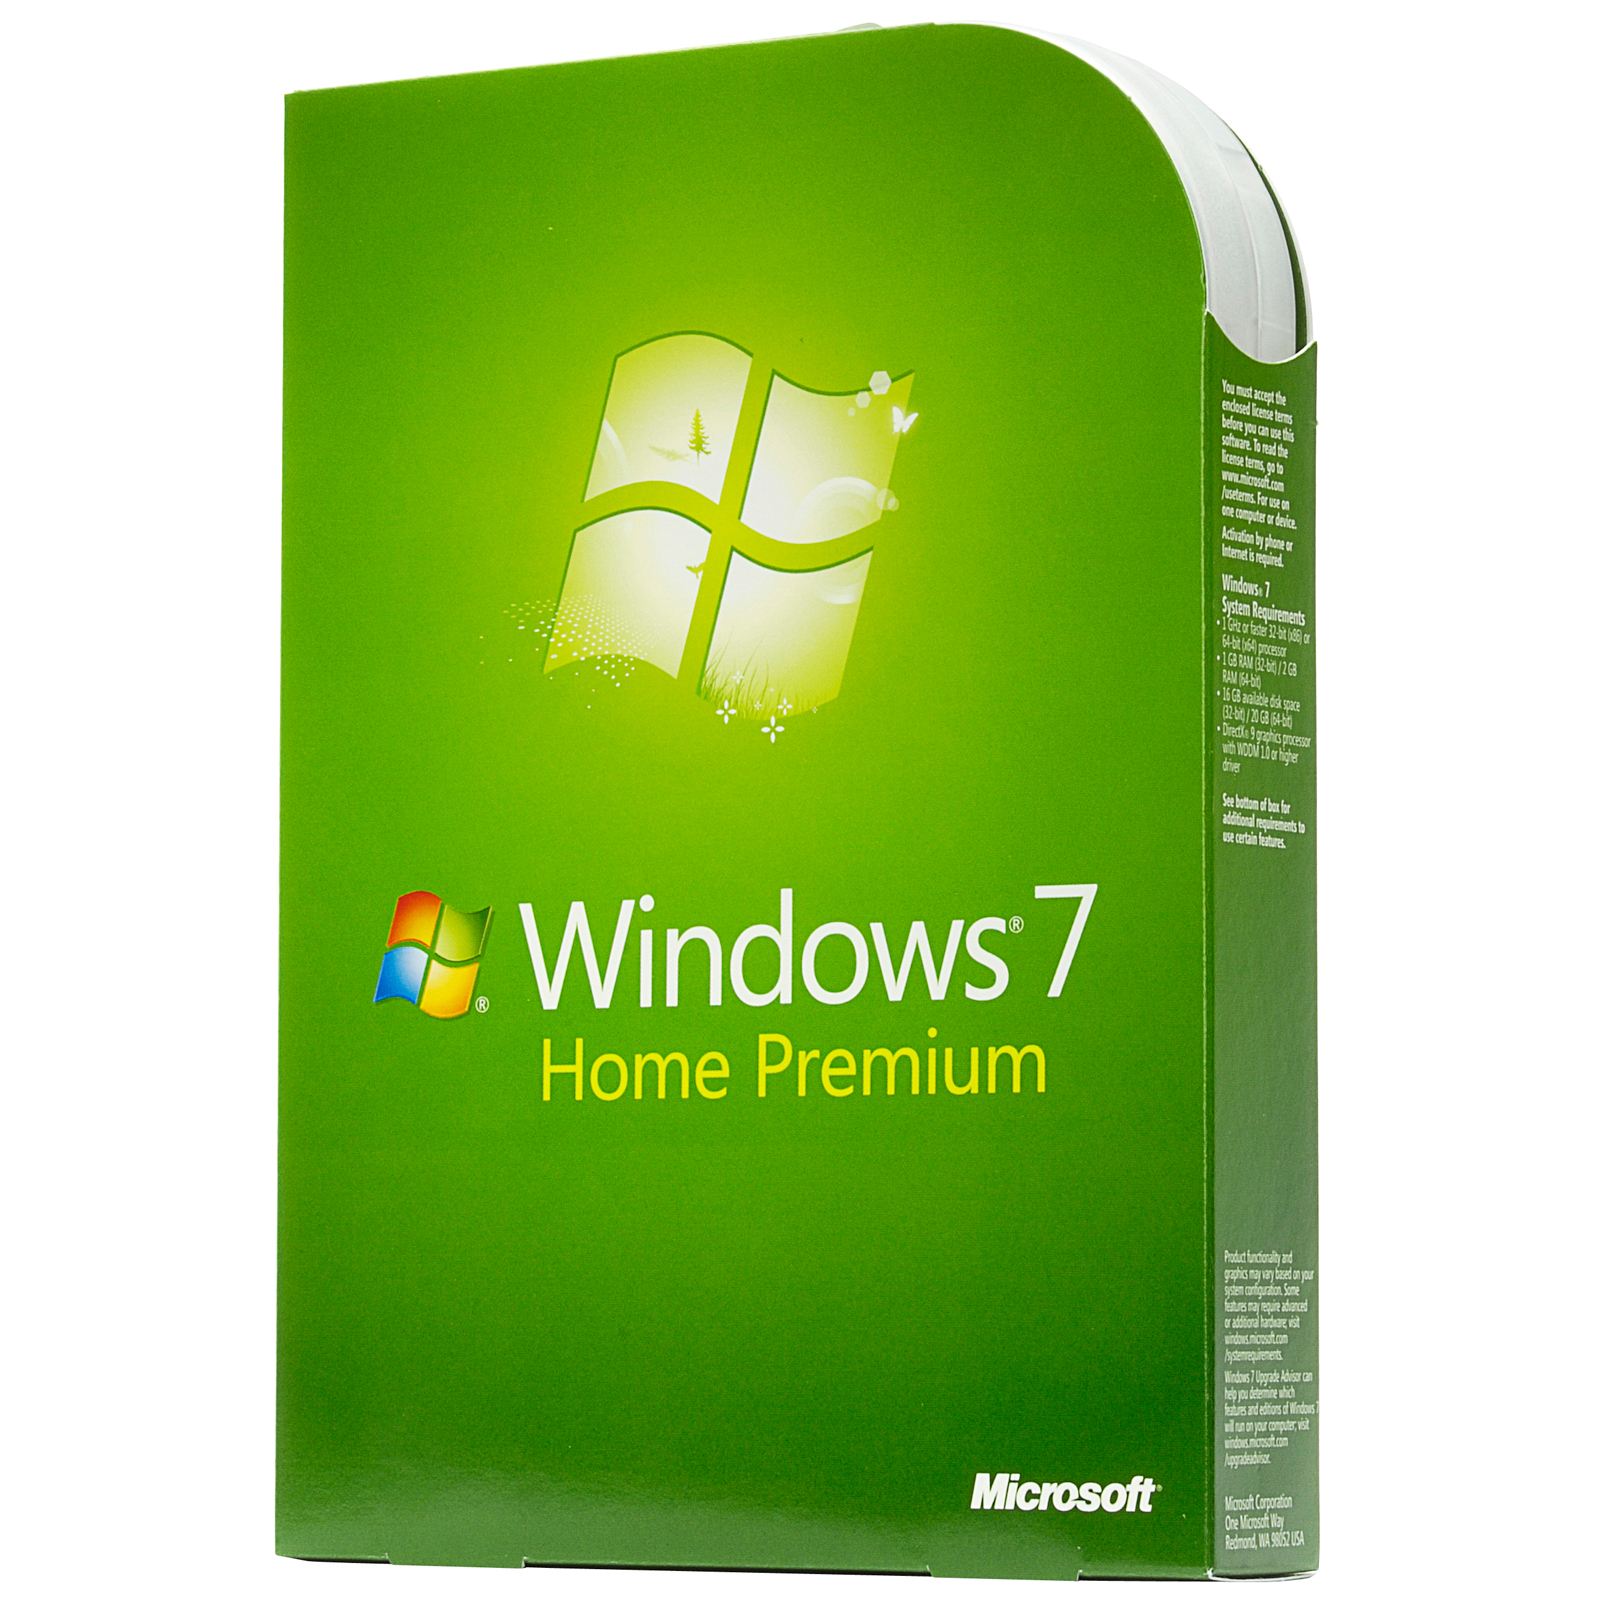 Download windows 7 home premium free full version how to download fall guys